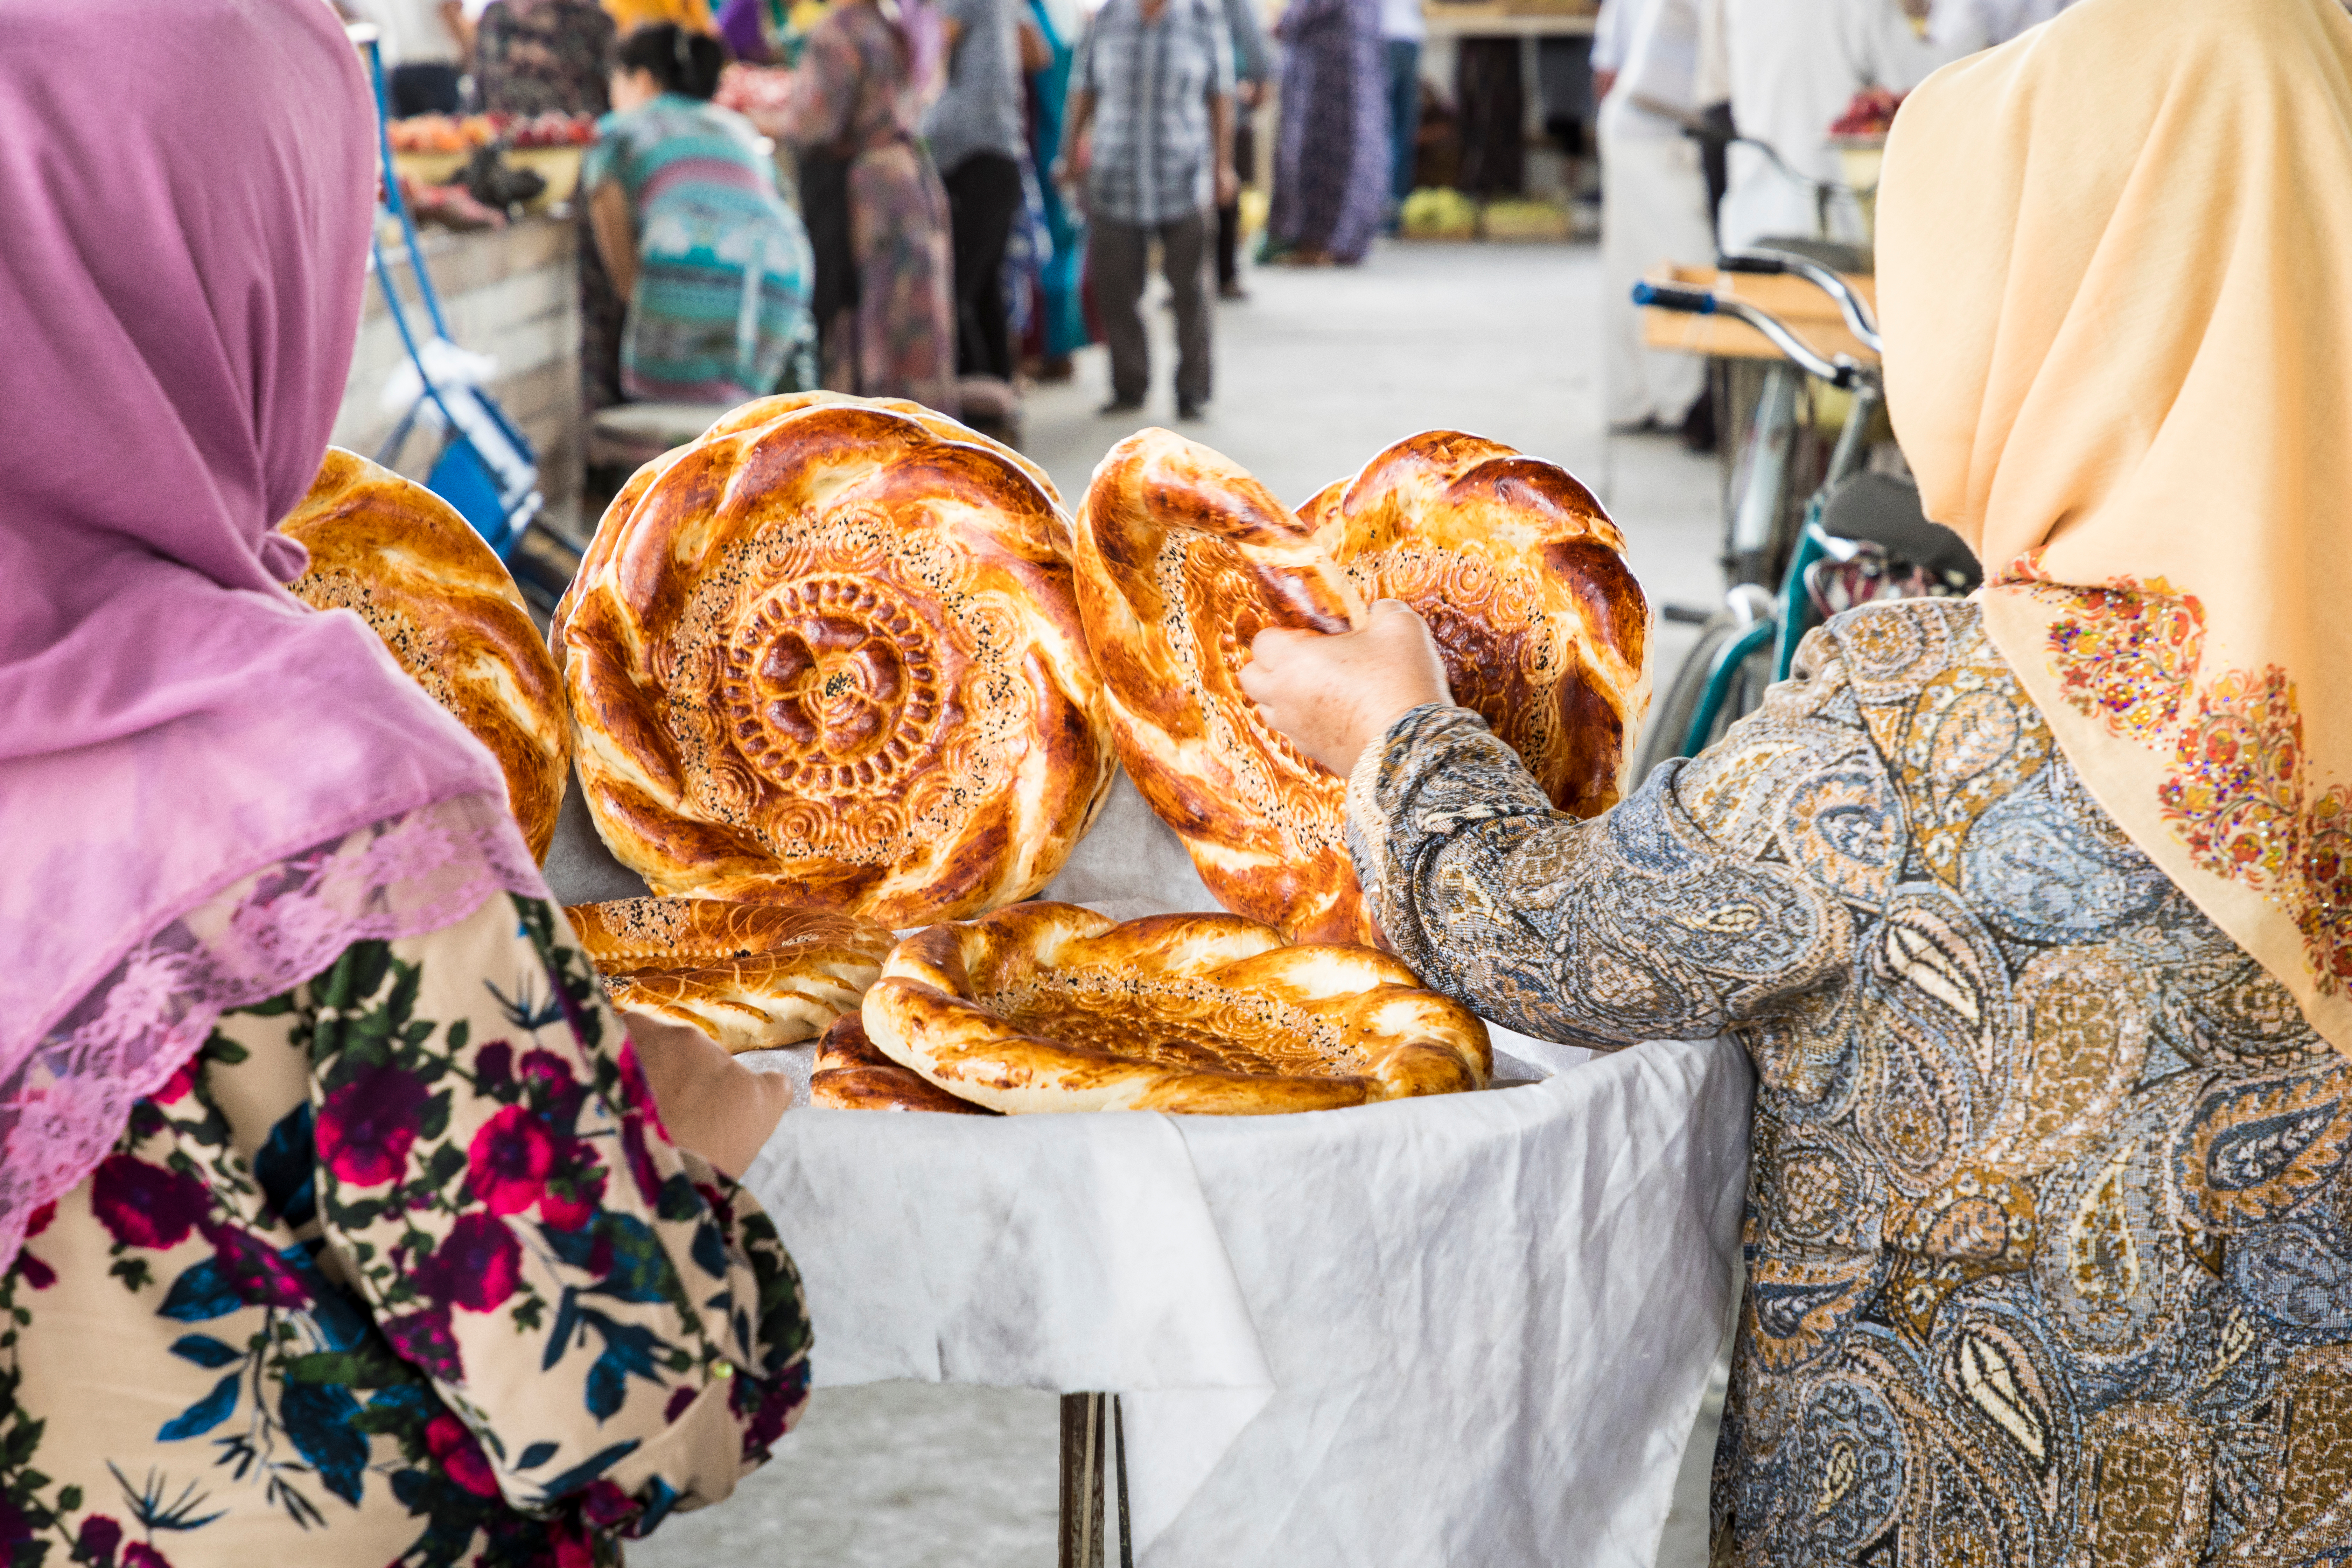 Women buying traditional bread © Curioso.Photography / Shutterstock